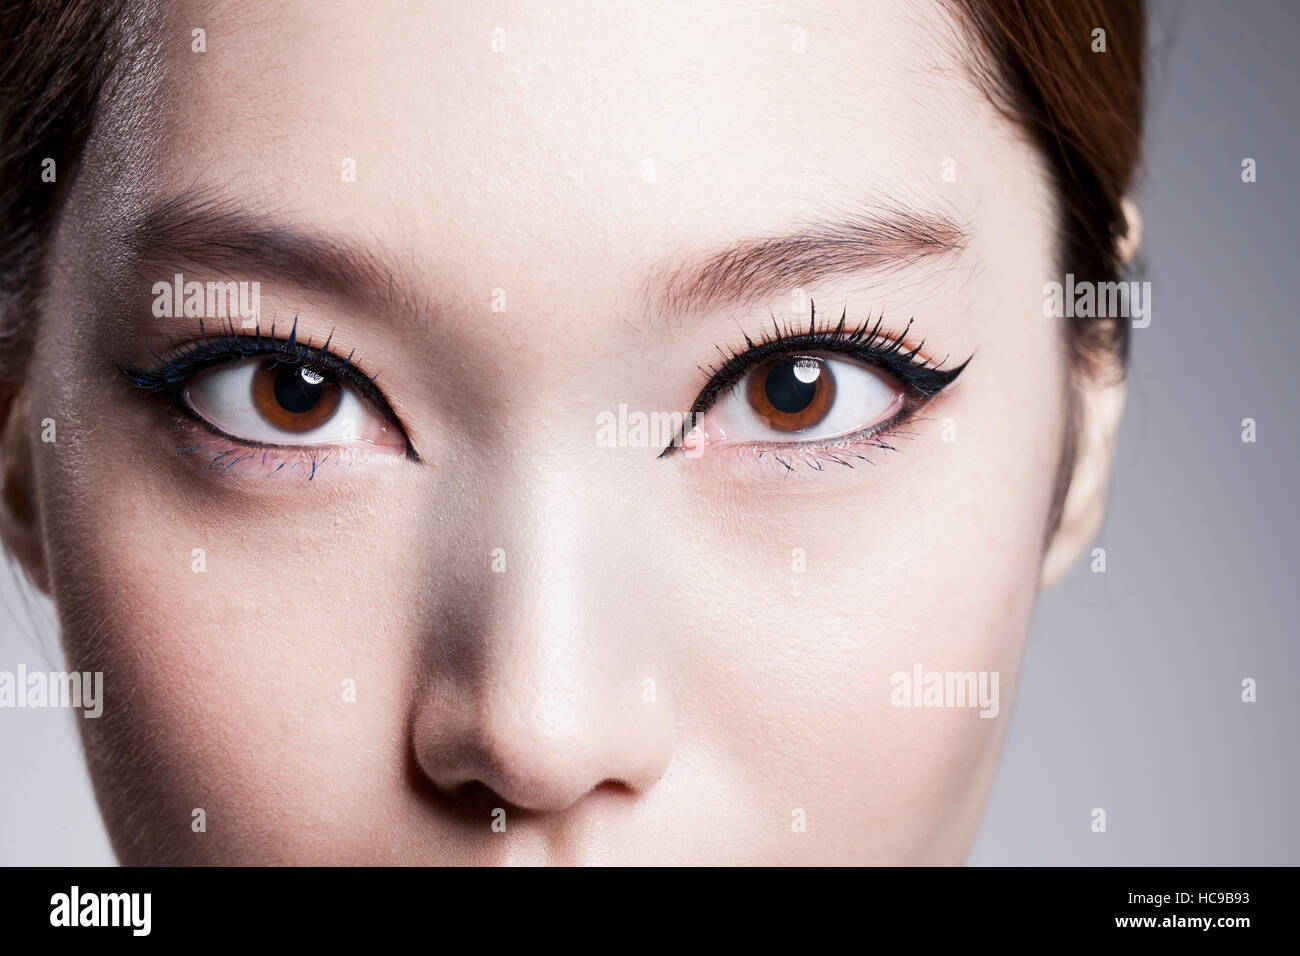 Face of young Korean woman with black eyeliner Stock Photo